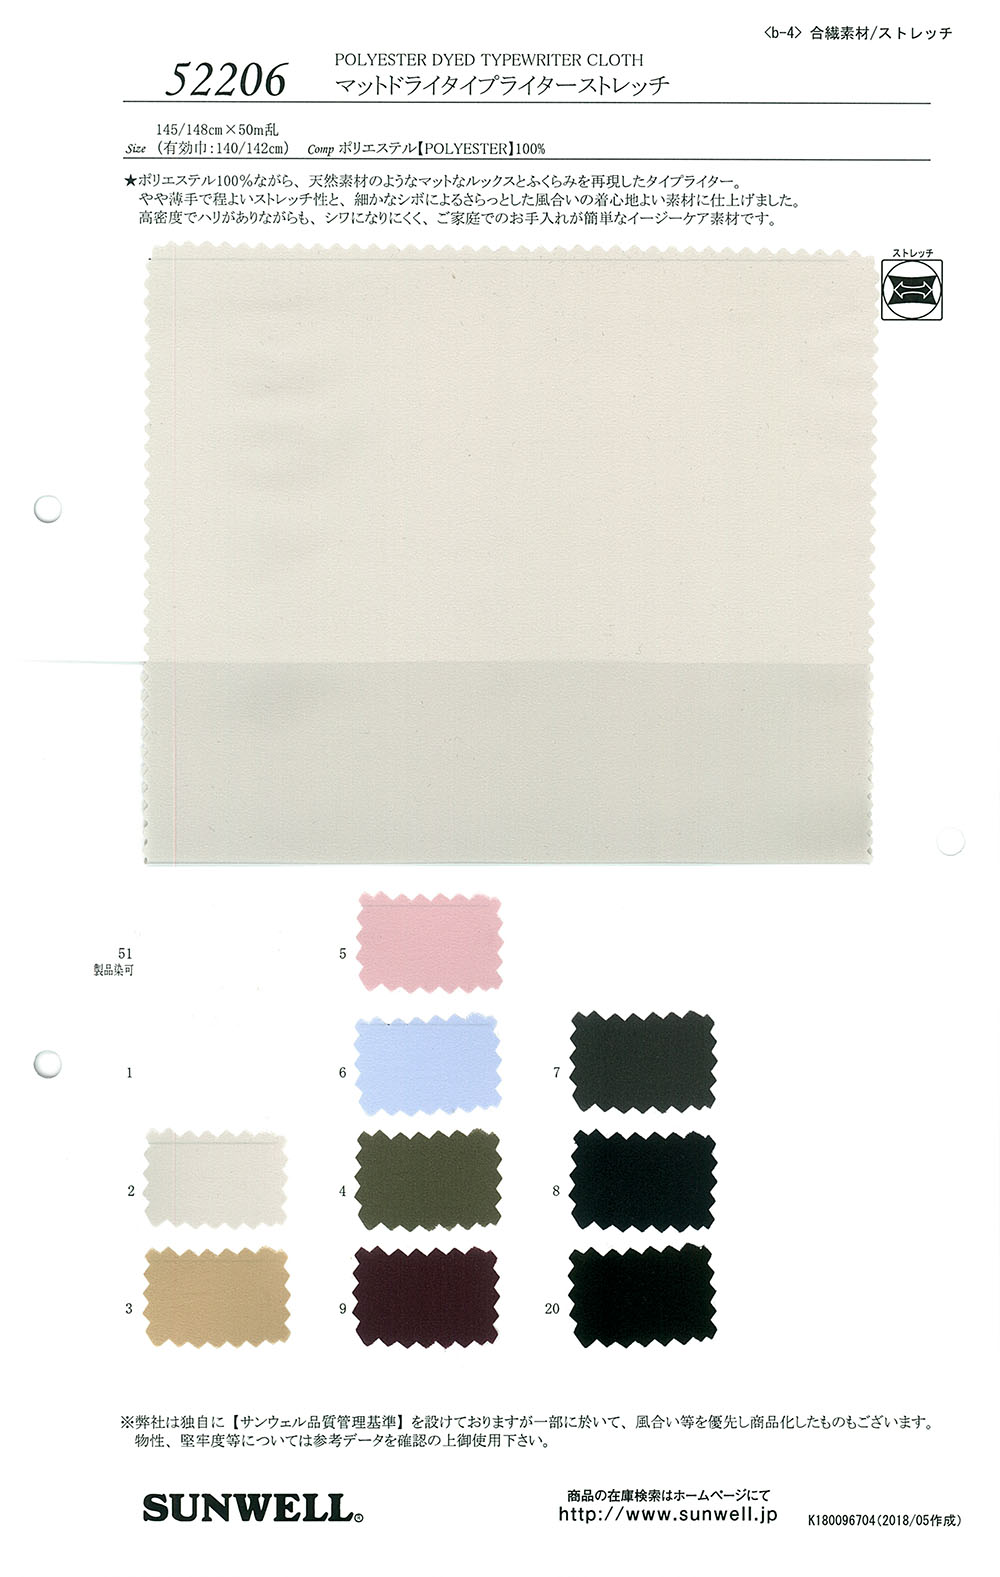 52206 Matte Dry Typewritter Cloth Stretch[Textile / Fabric] SUNWELL